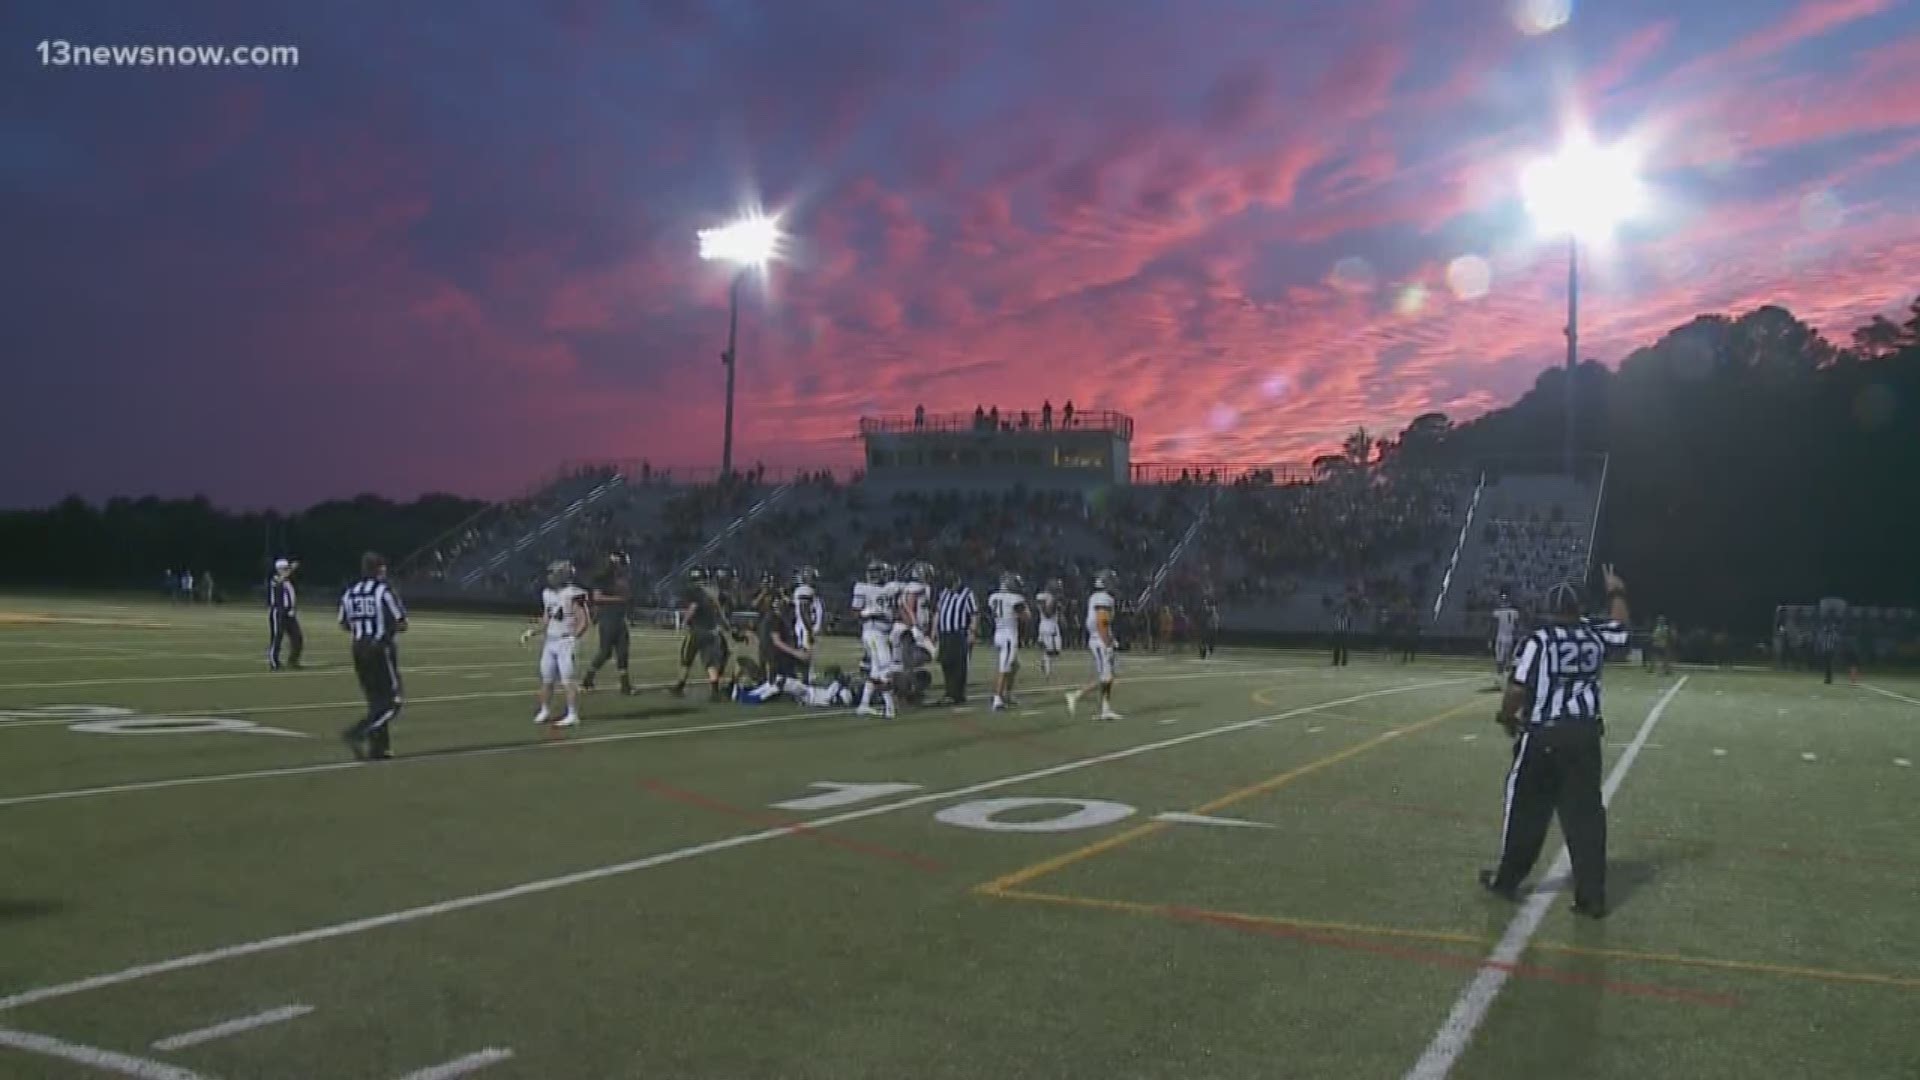 Several schools moved up their games to beat the storm. We've got Beach District highlights.